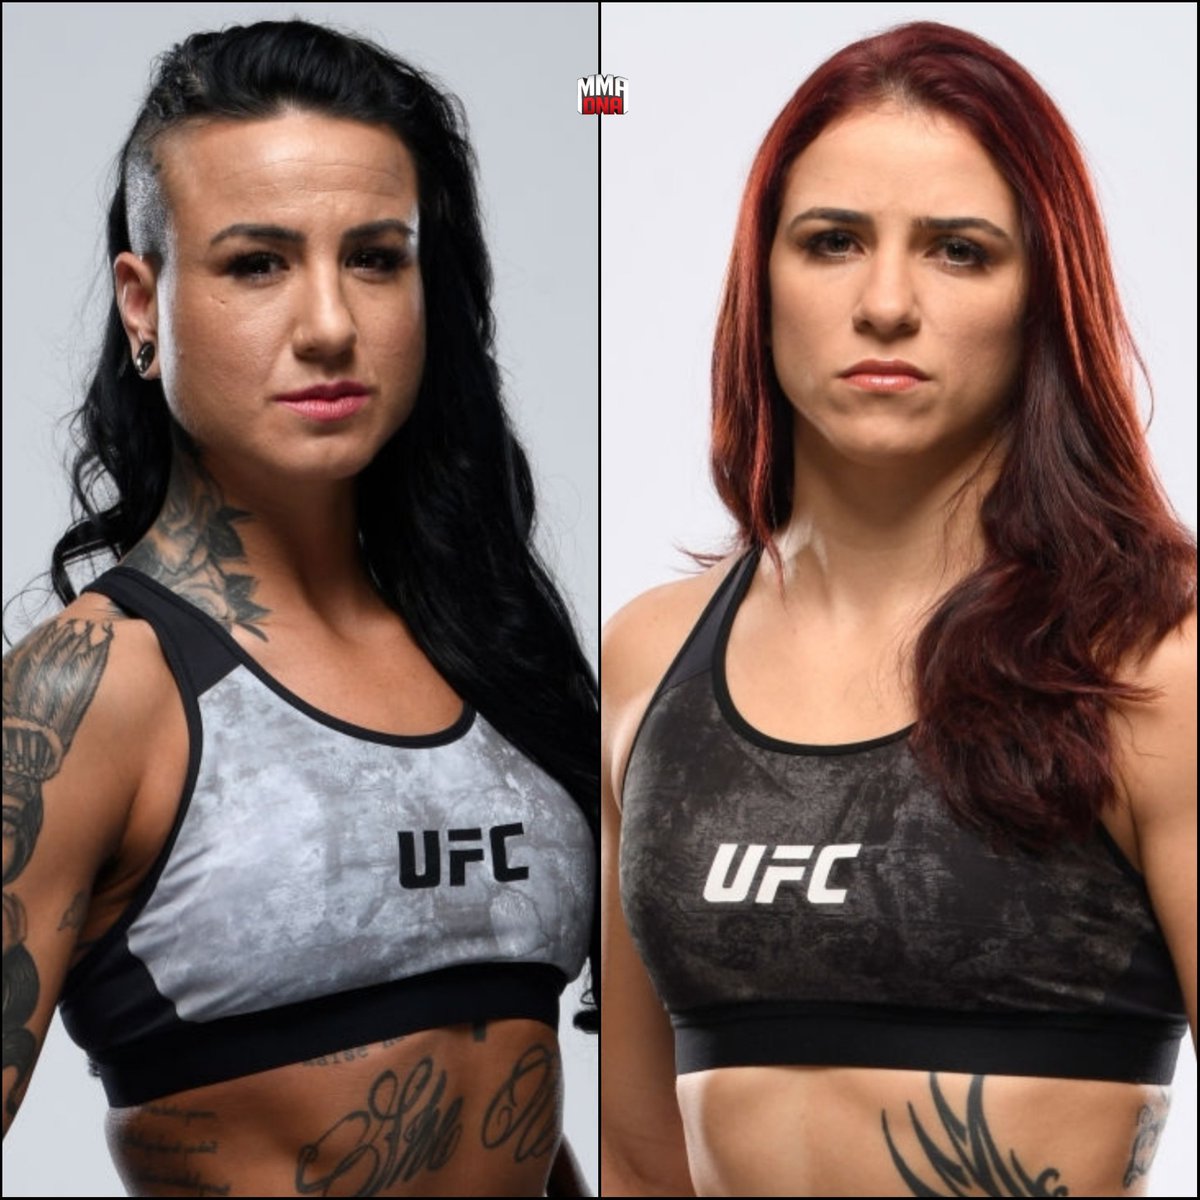 Ashlee Evans-Smith will fight Norma Dumont at UFC event on November 28th. (...